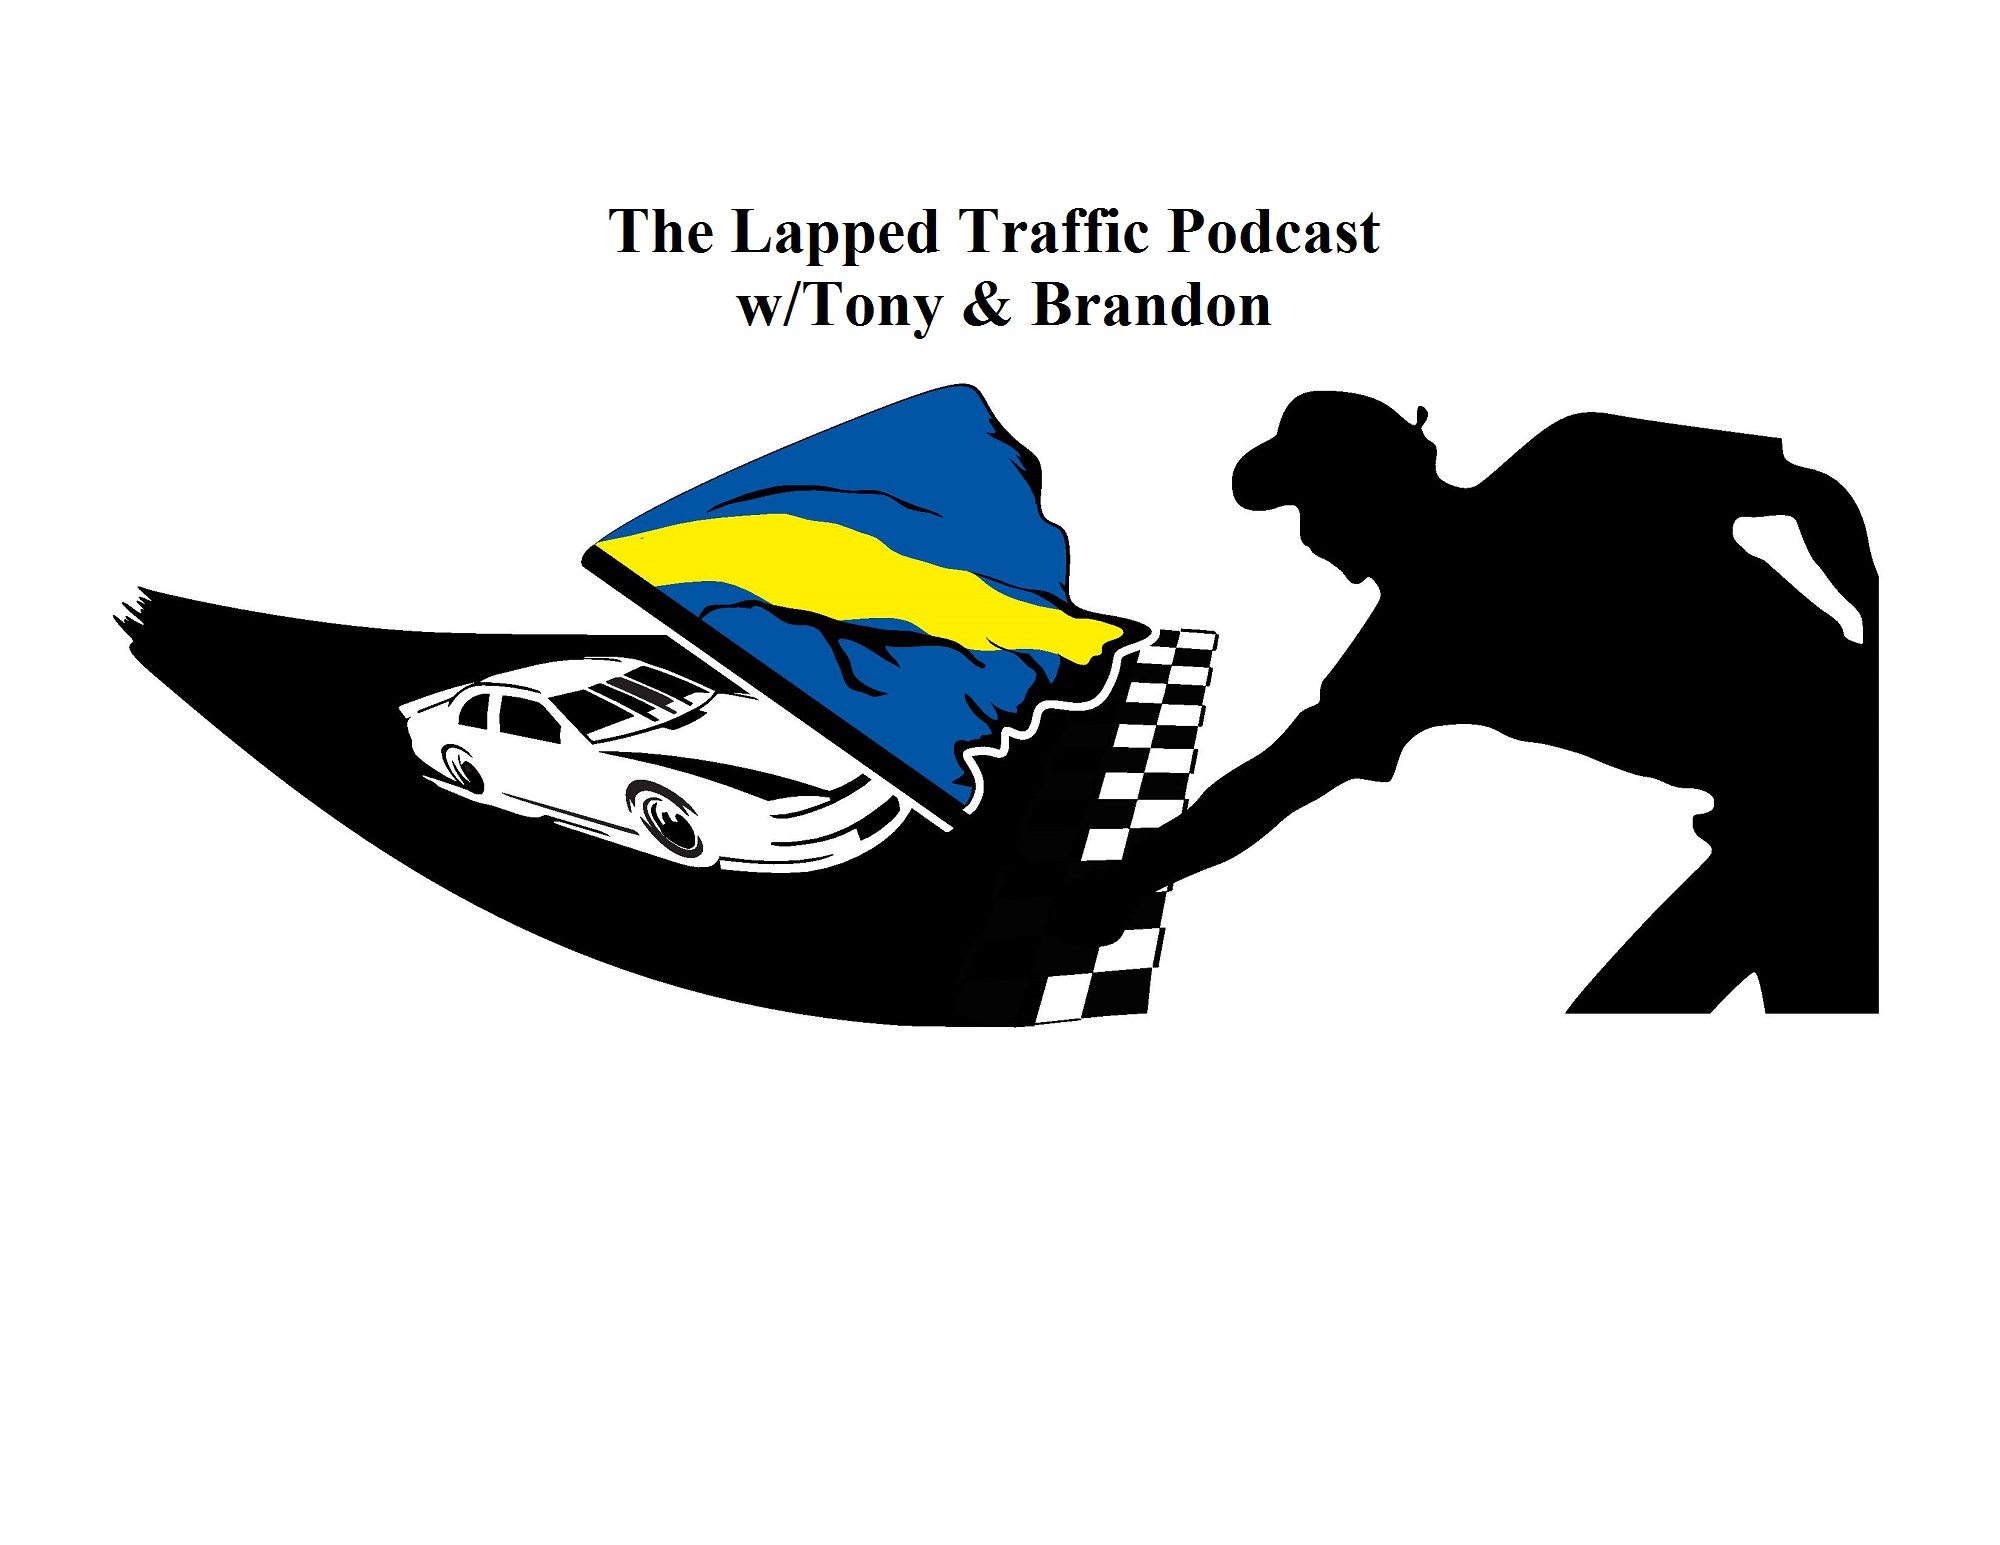 The Lapped Traffic Podcast- Episode 5